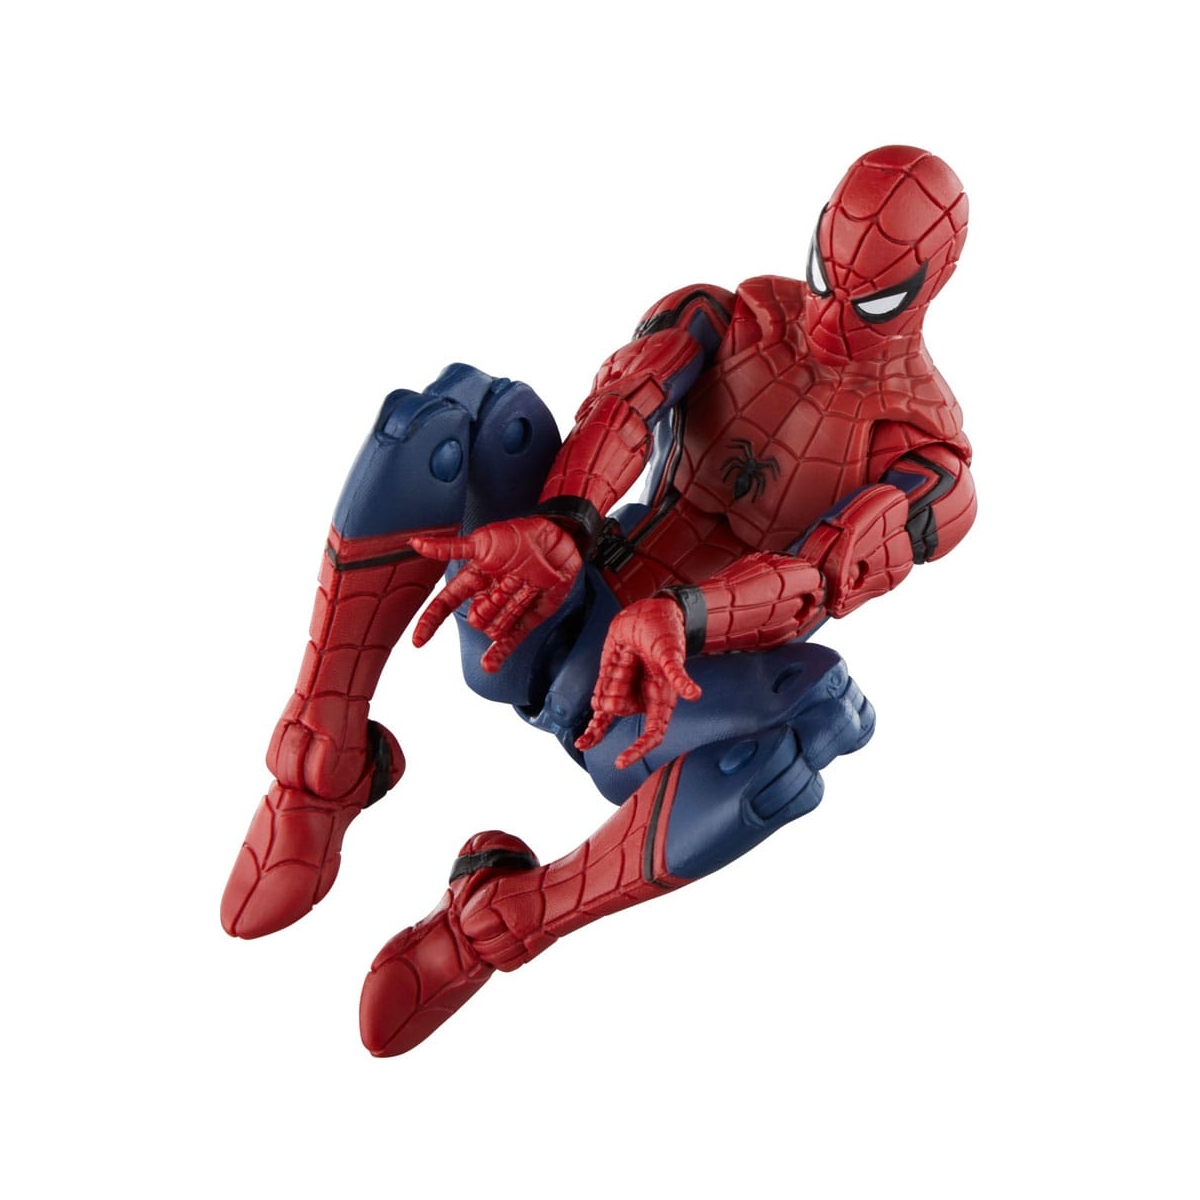 Figurine Spiderman Homecoming far from home Marvel Avengers Loin des siens  infinity war figure collection personnage - Cdiscount Jeux - Jouets